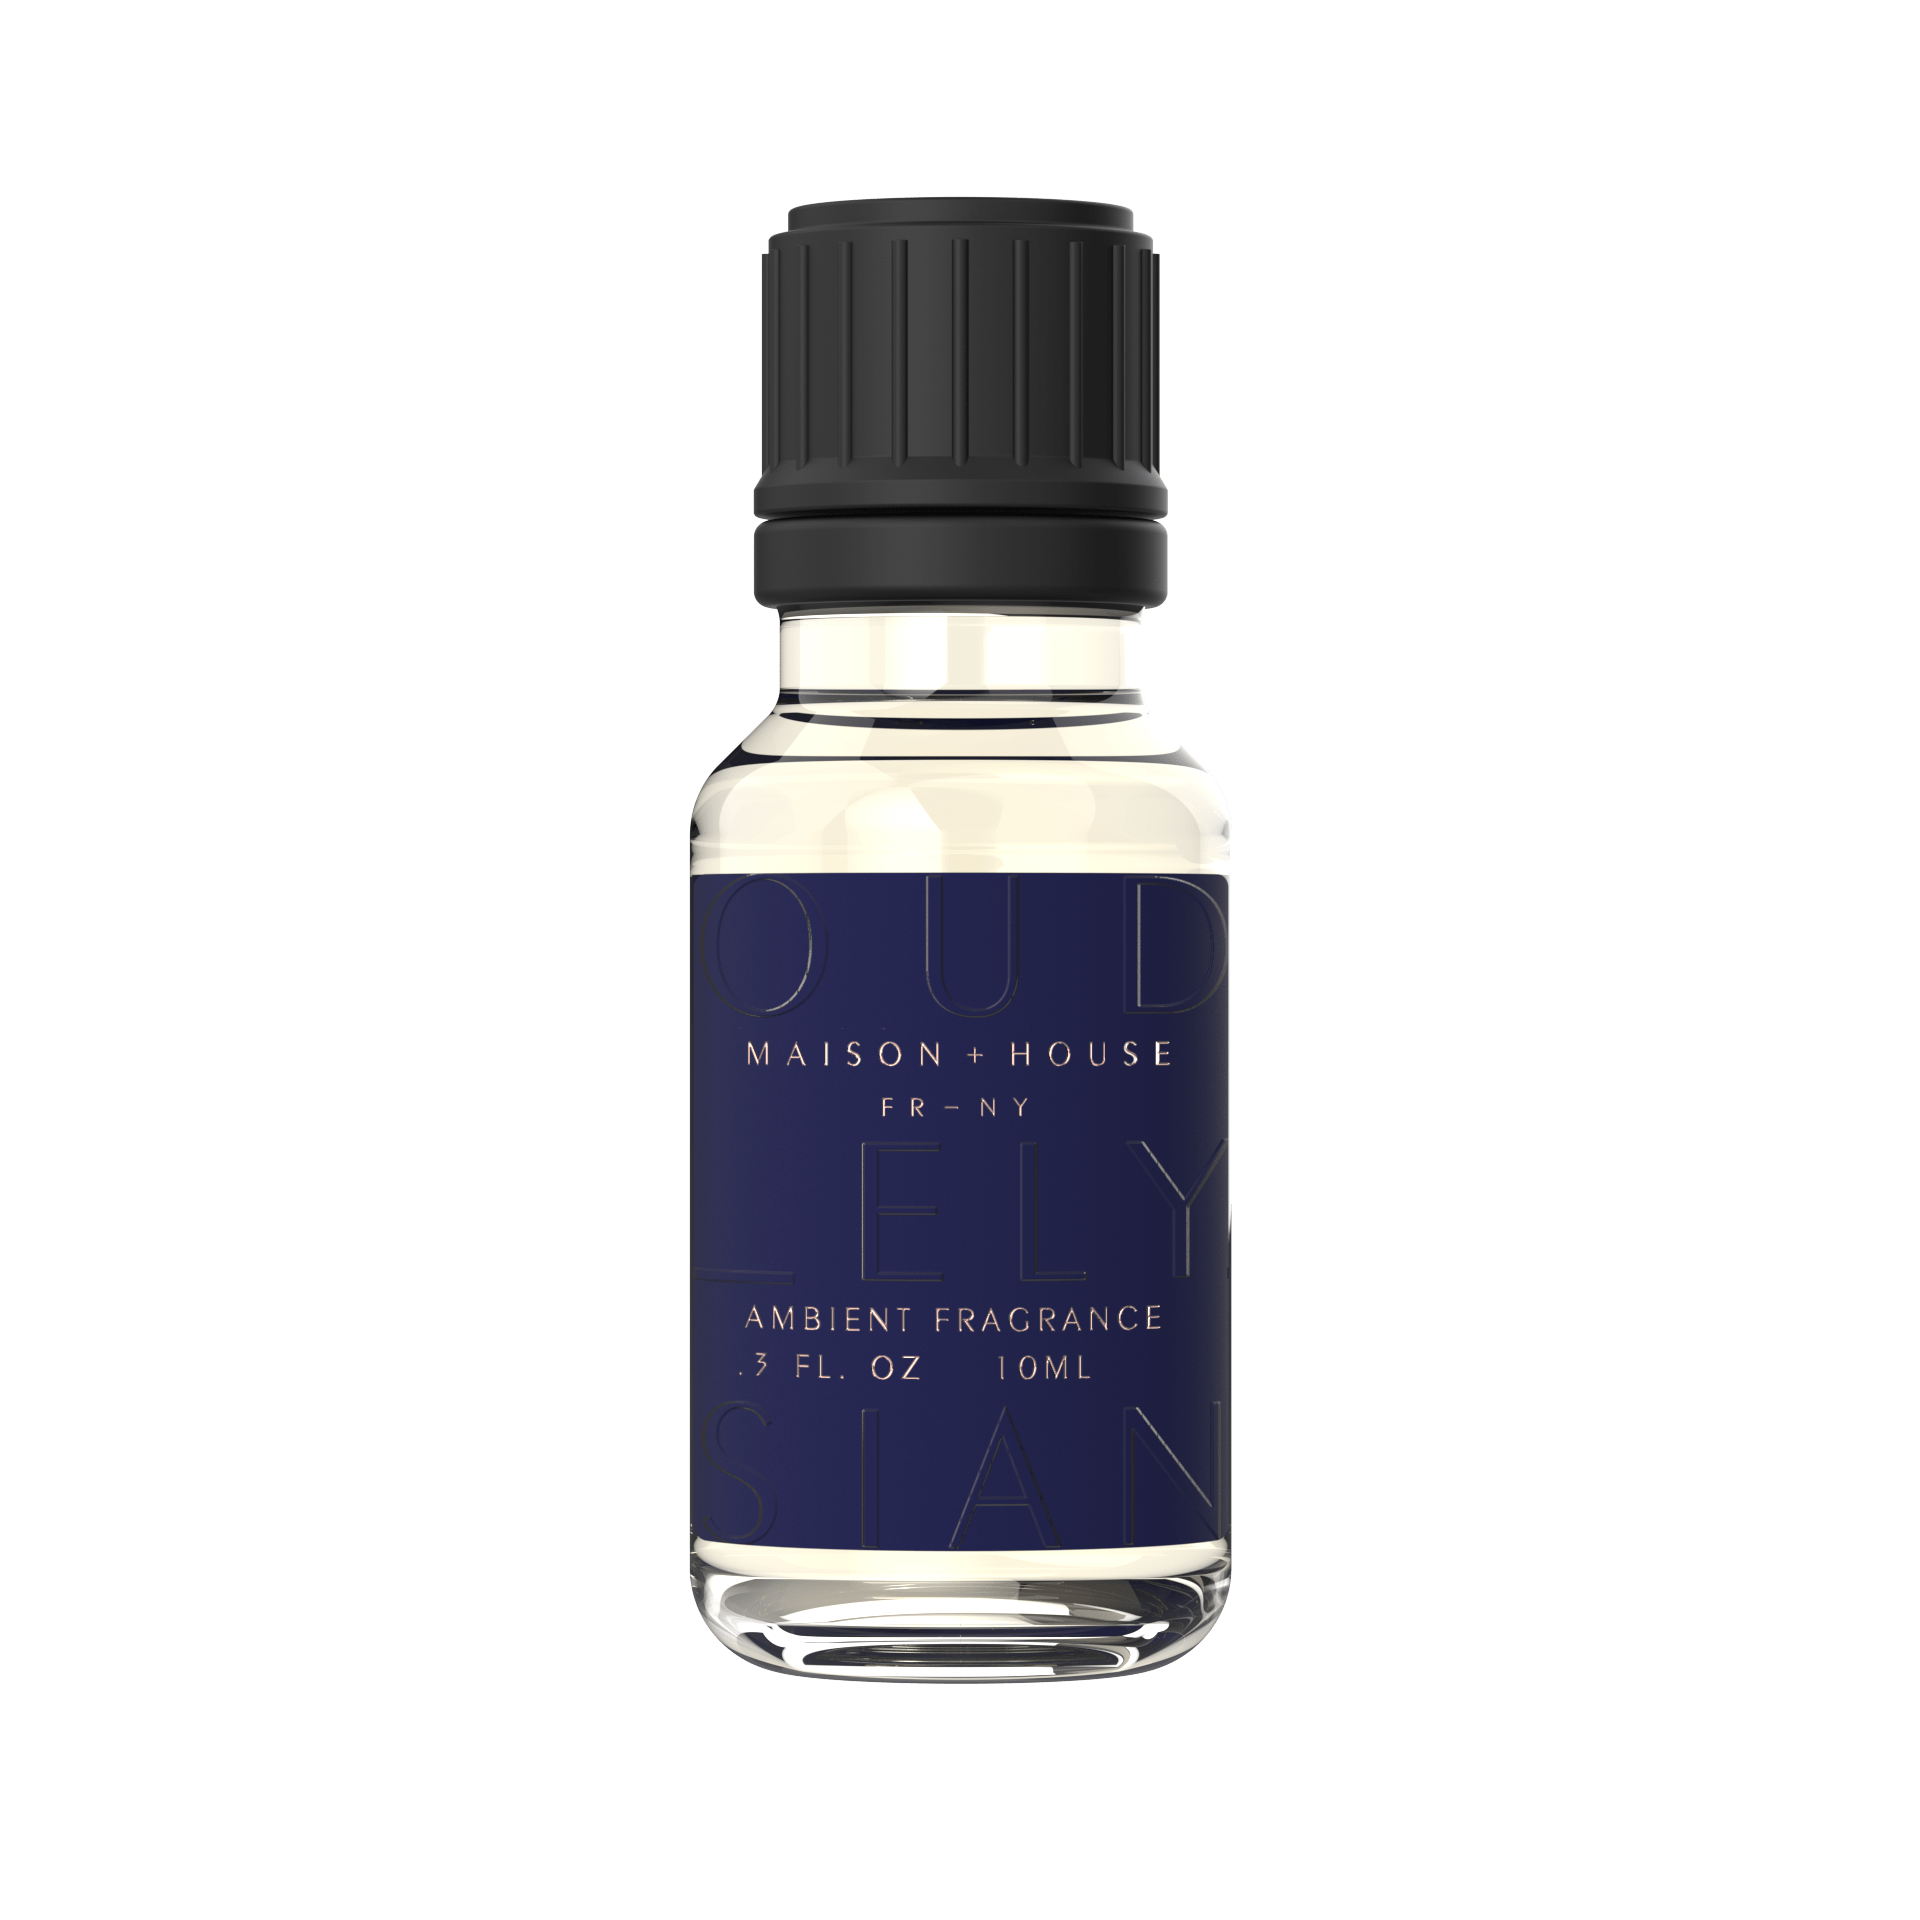 Maison+House Oud Elysian French Ambient Fragrance